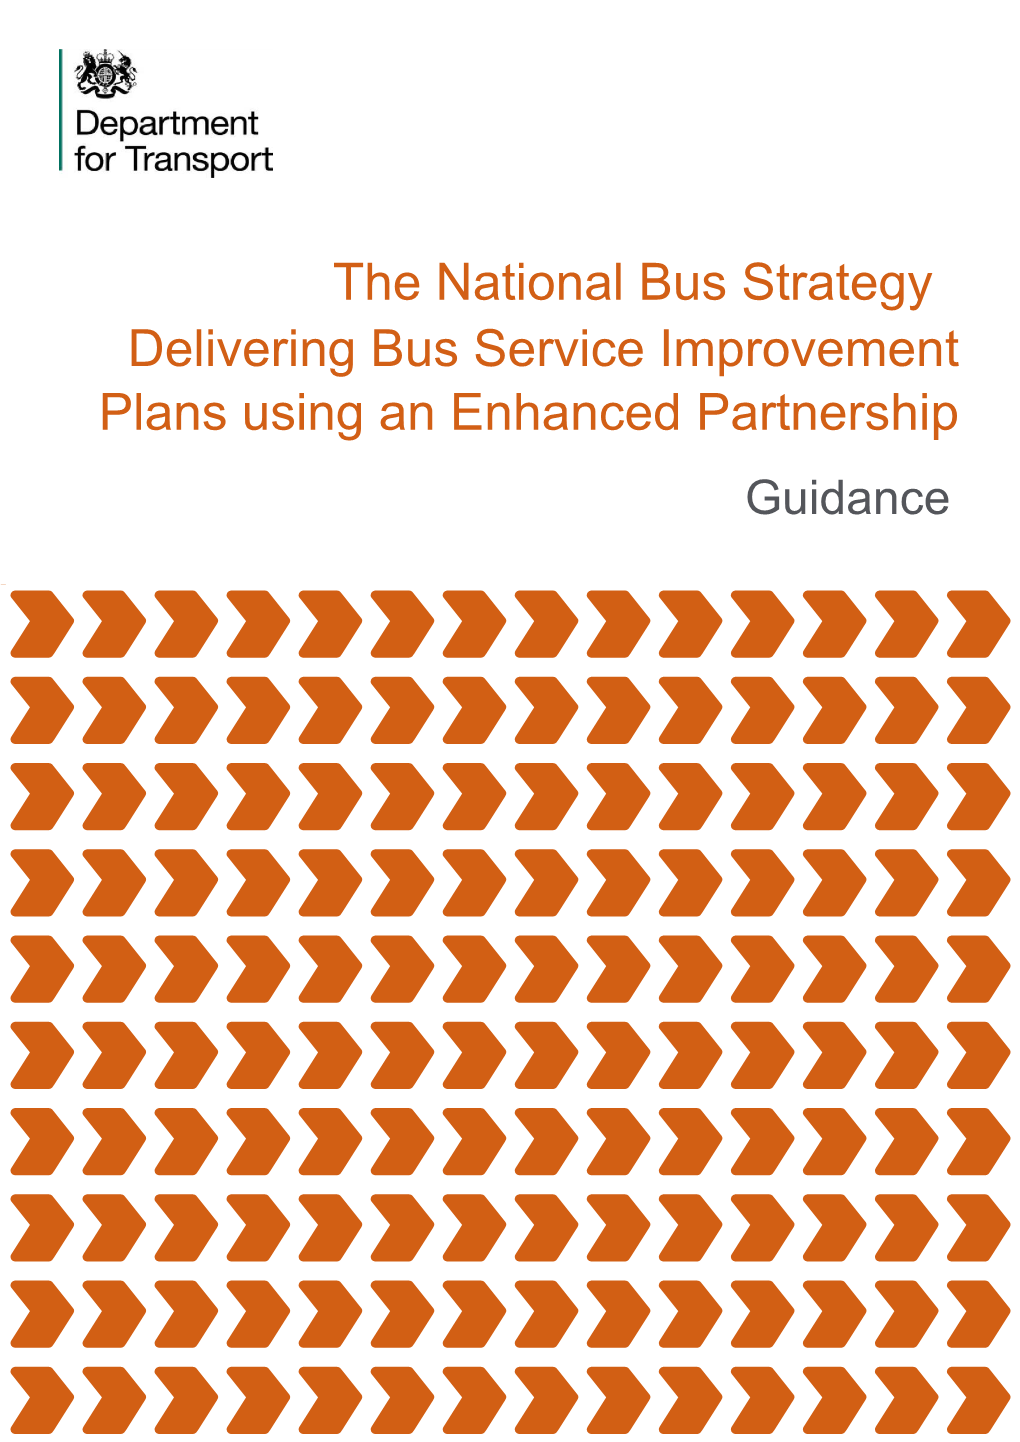 The Bus Services Act 2017: Enhanced Partnerships